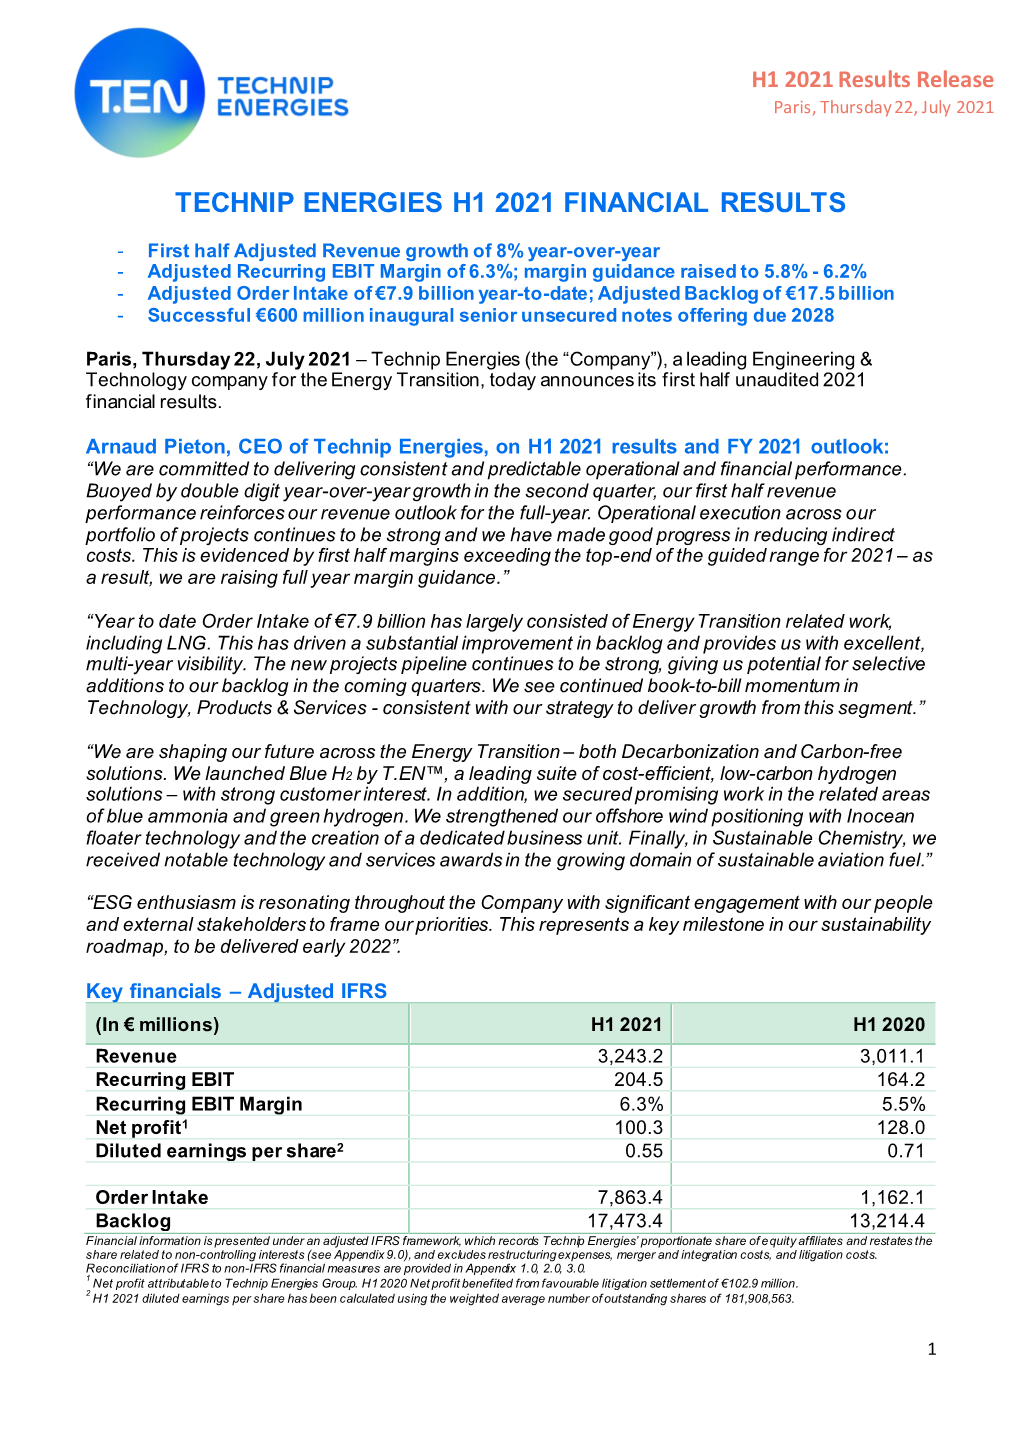 Technip Energies H1 2021 Financial Results